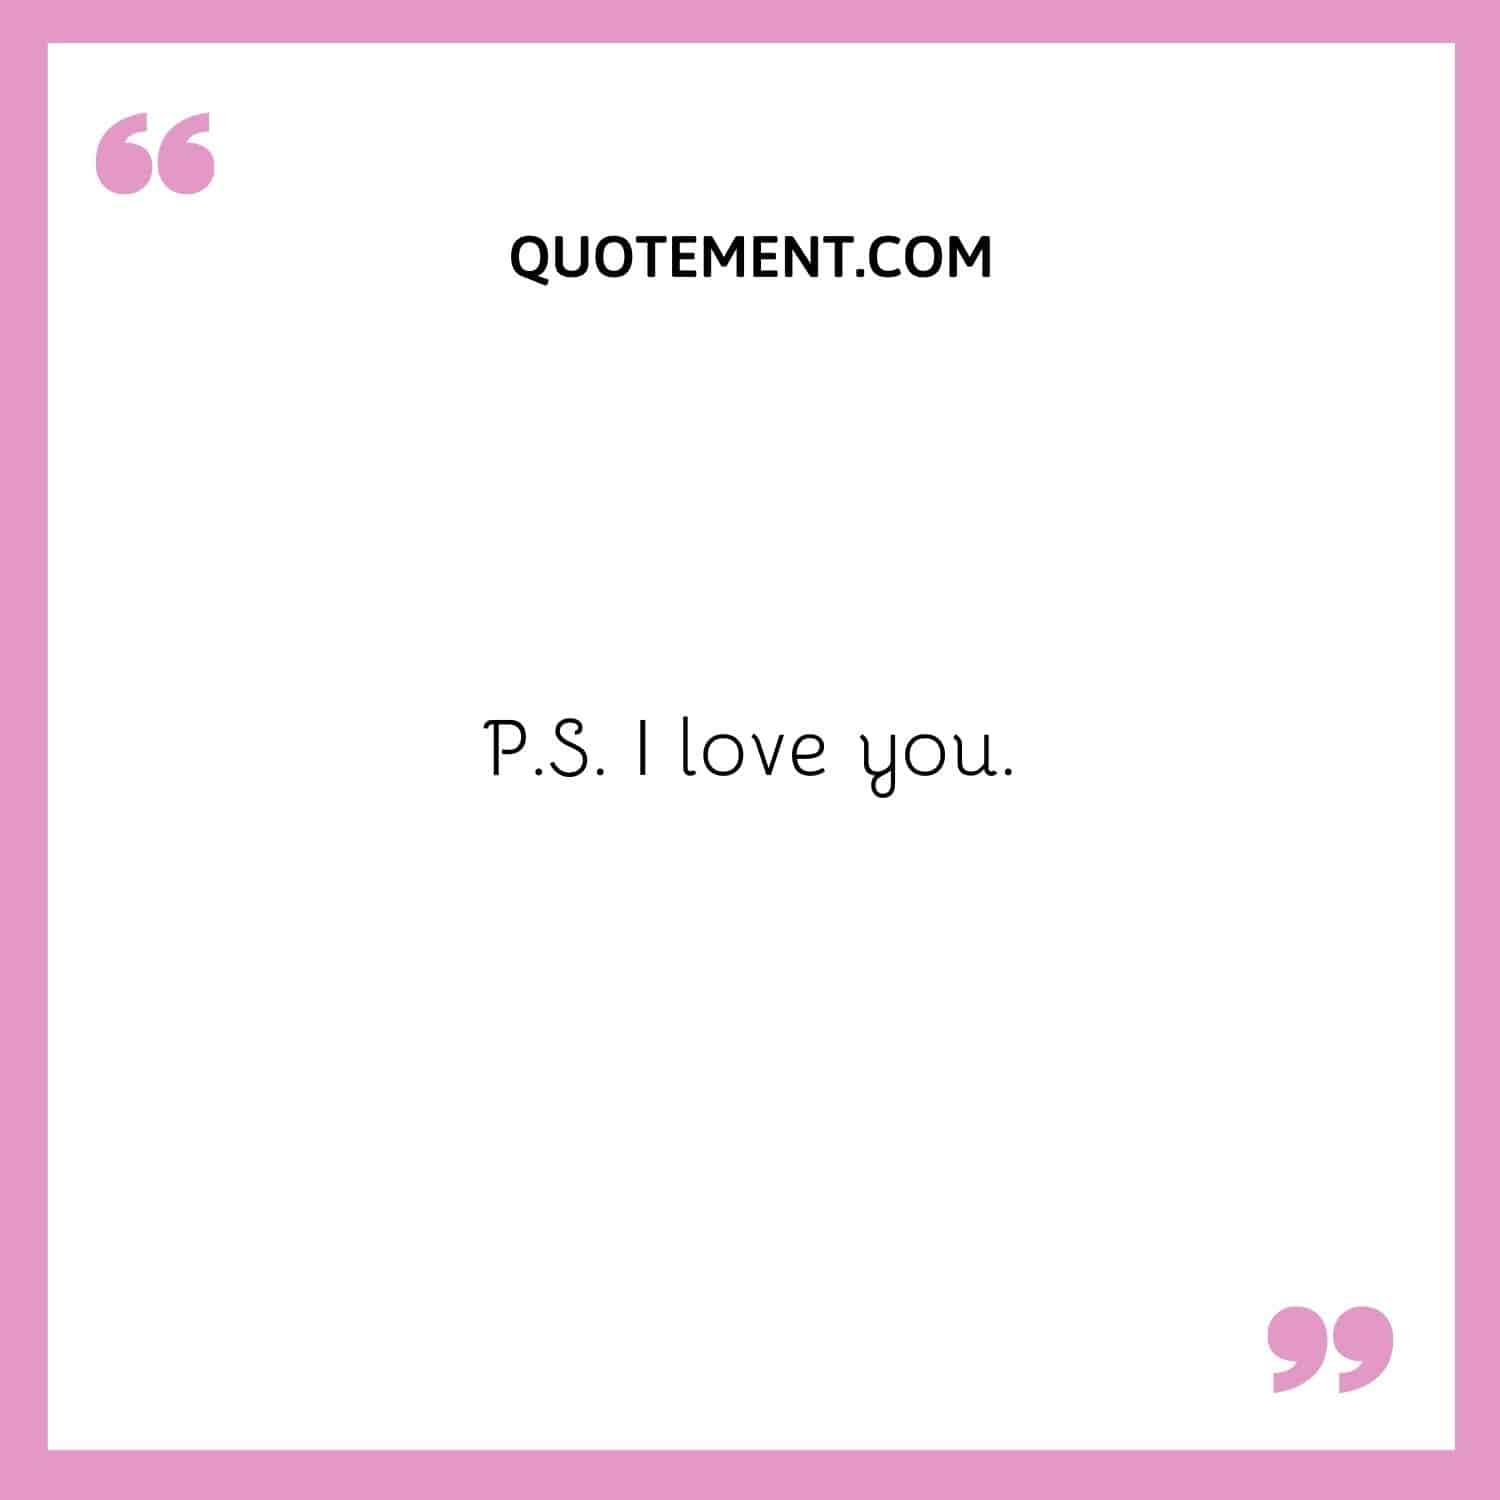 P.S. I love you.